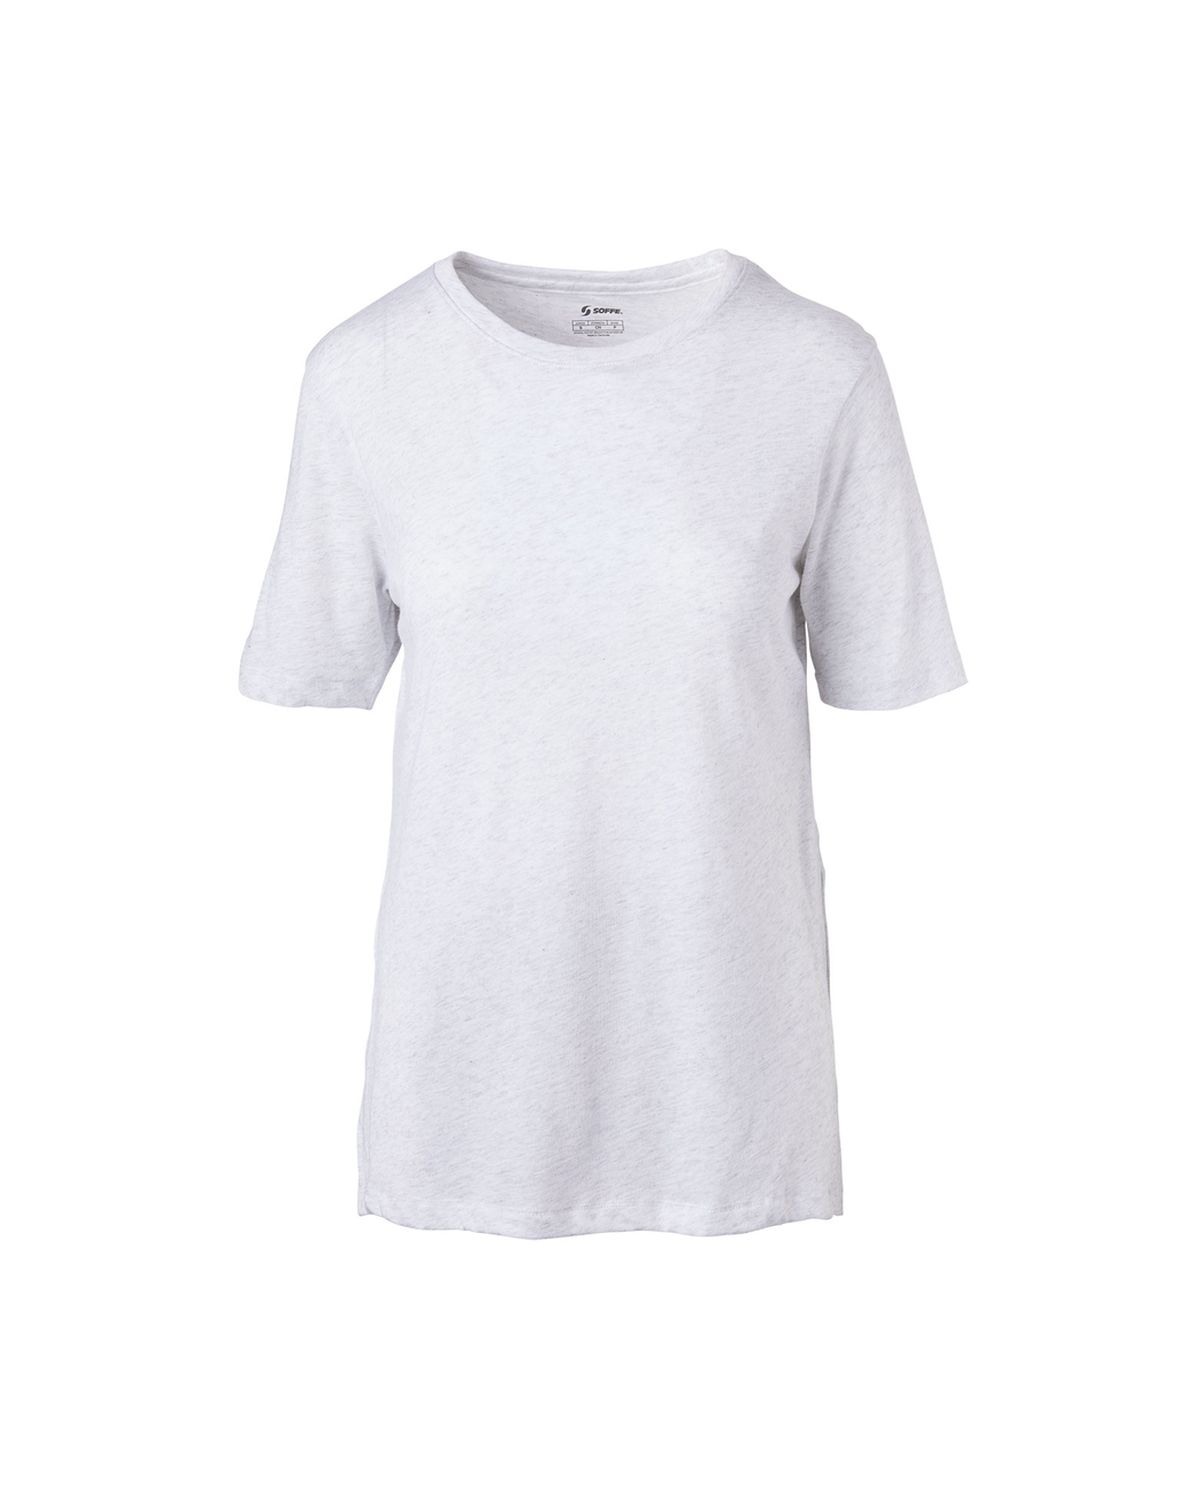 'Soffe 1829V Womans Squad High Vent Tee'